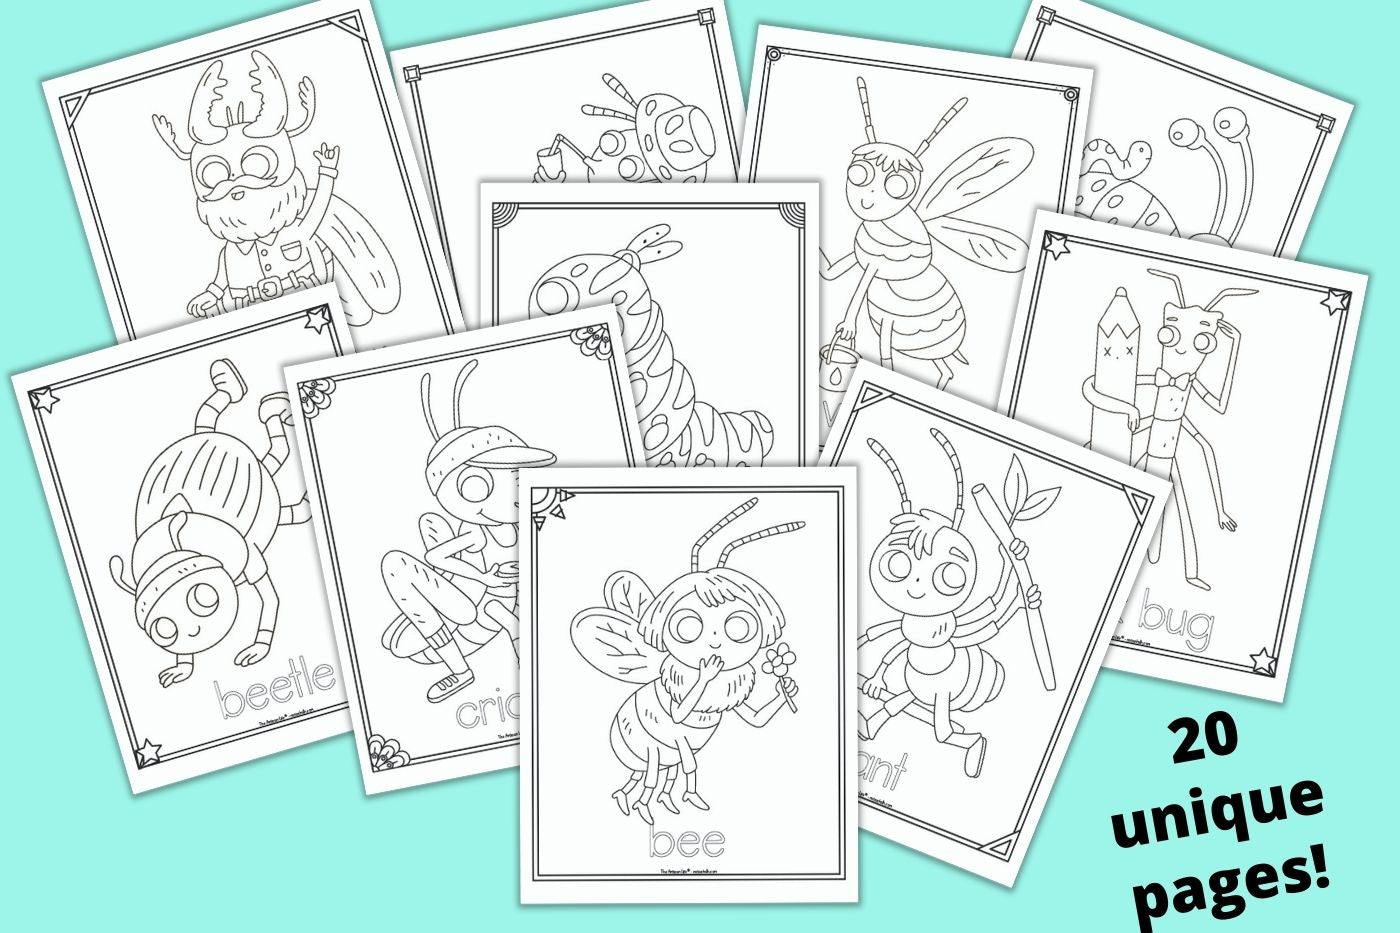 A preview of 10 cute insect coloring pages for children with the text overlay "20 unique pages!"